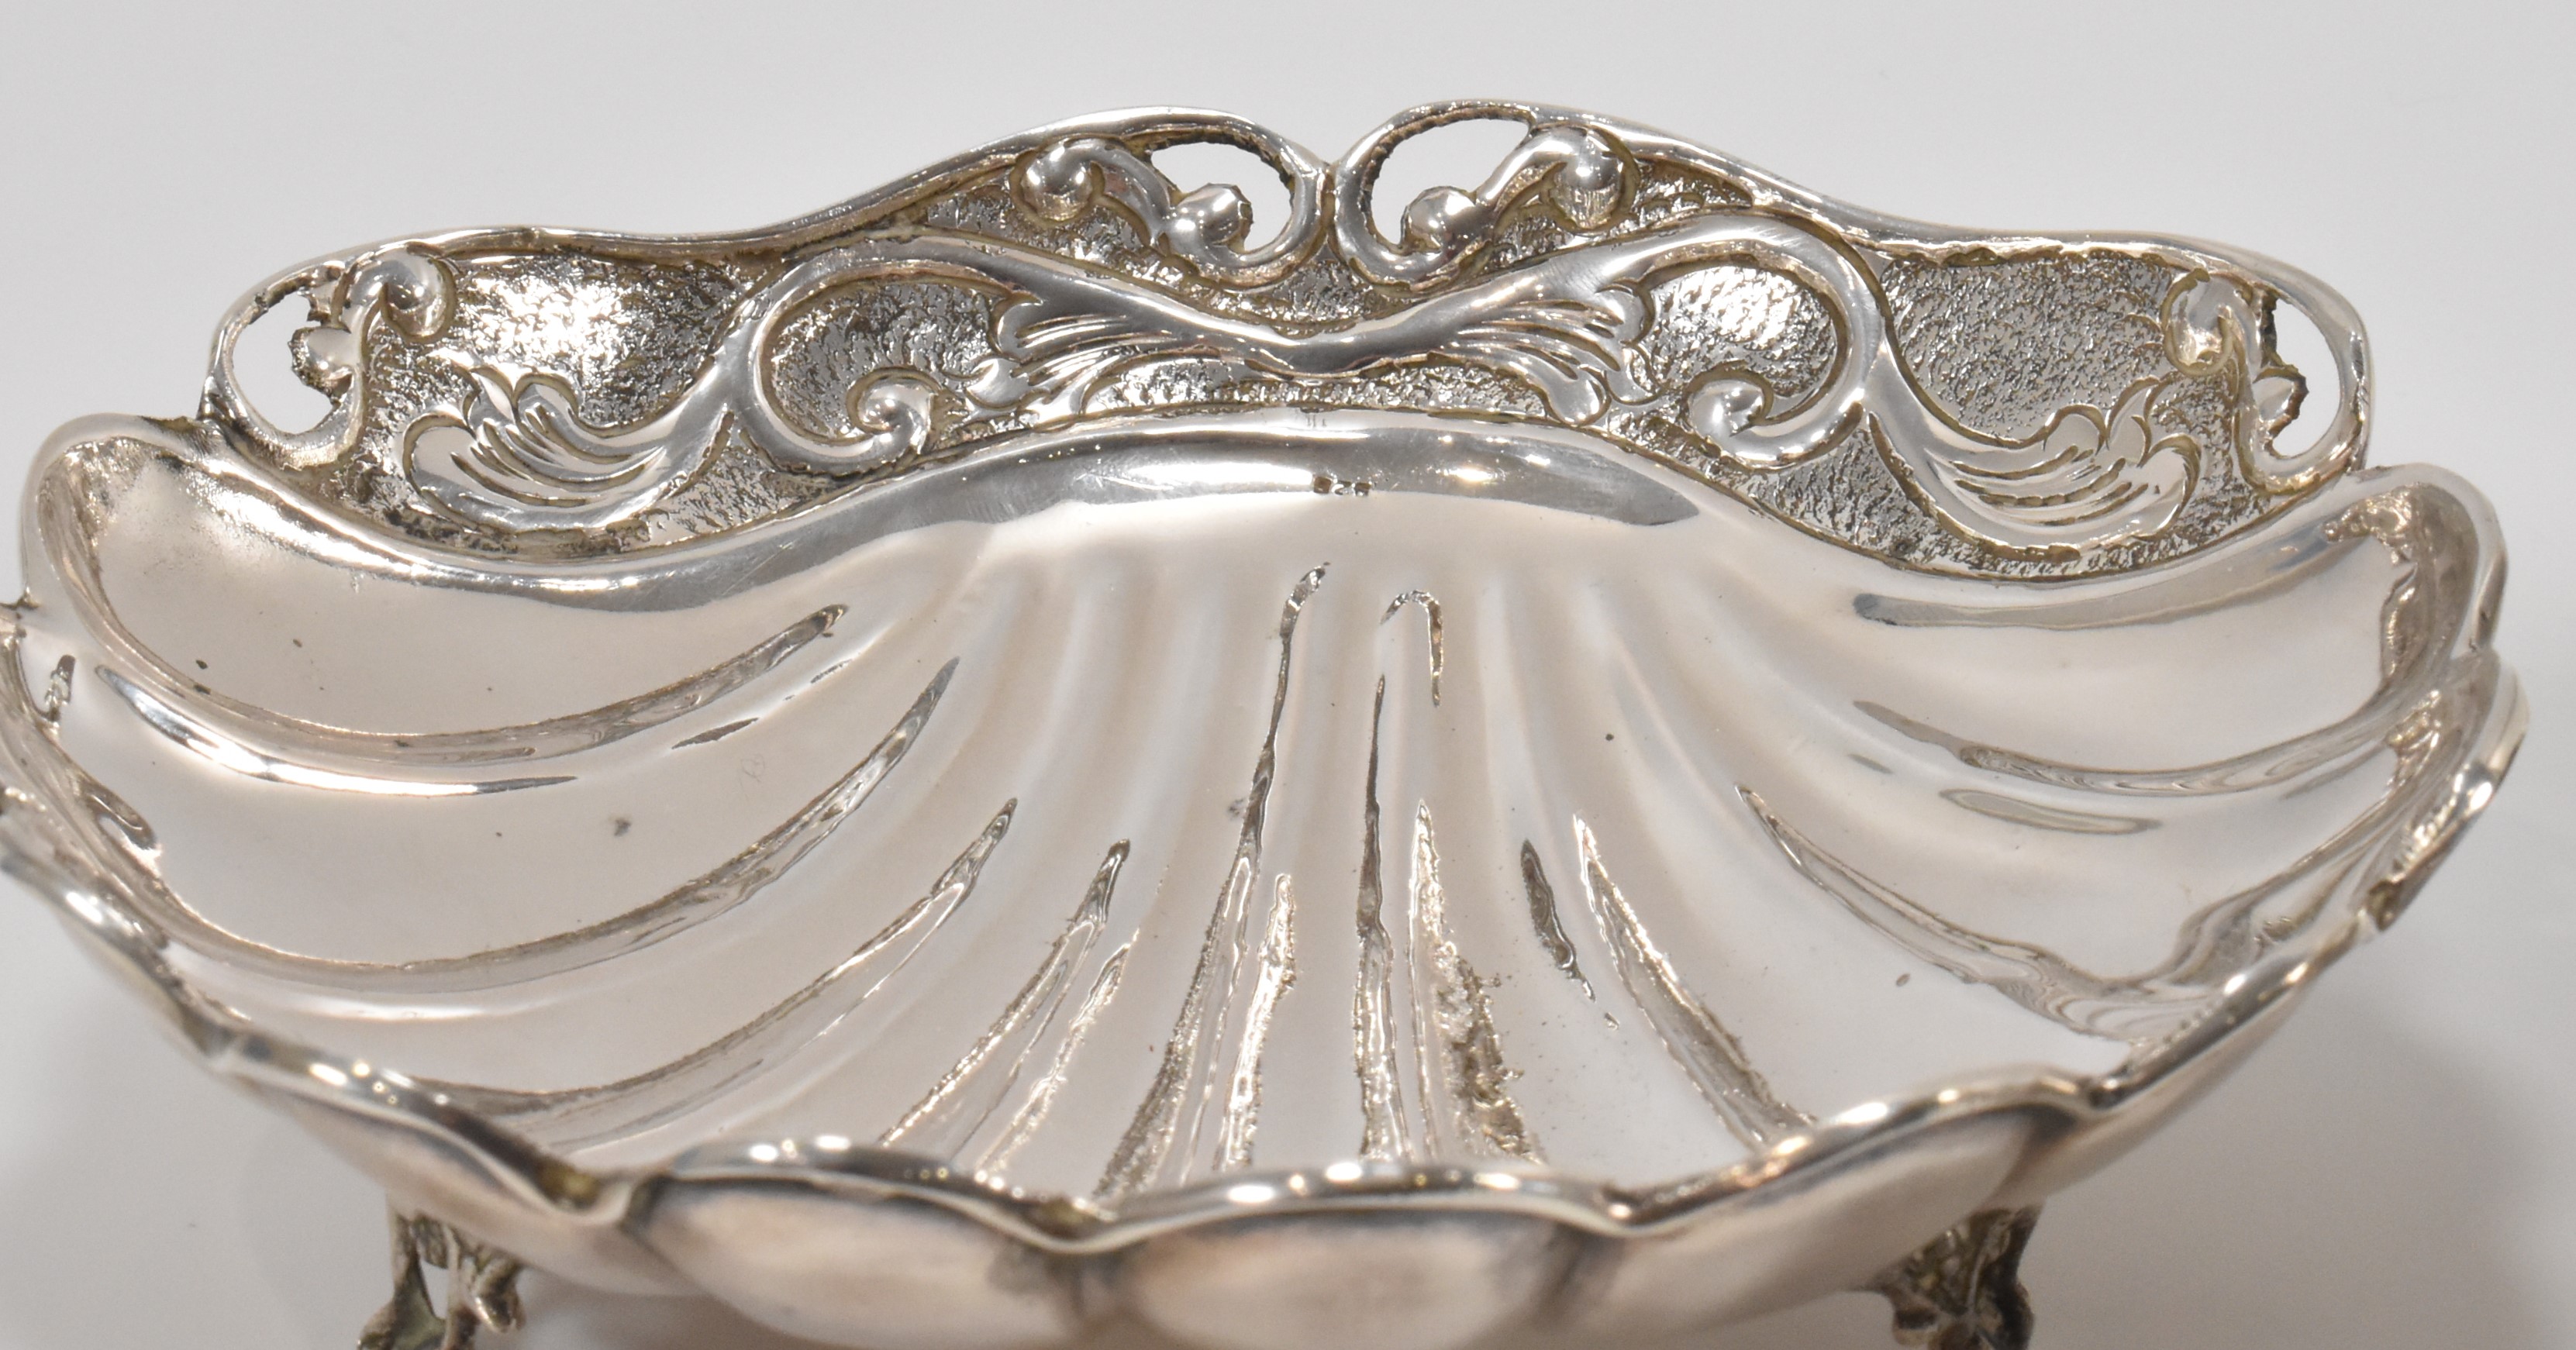 PAIR OF SILVER SCALLOP SHELL BOWLS - Image 2 of 7